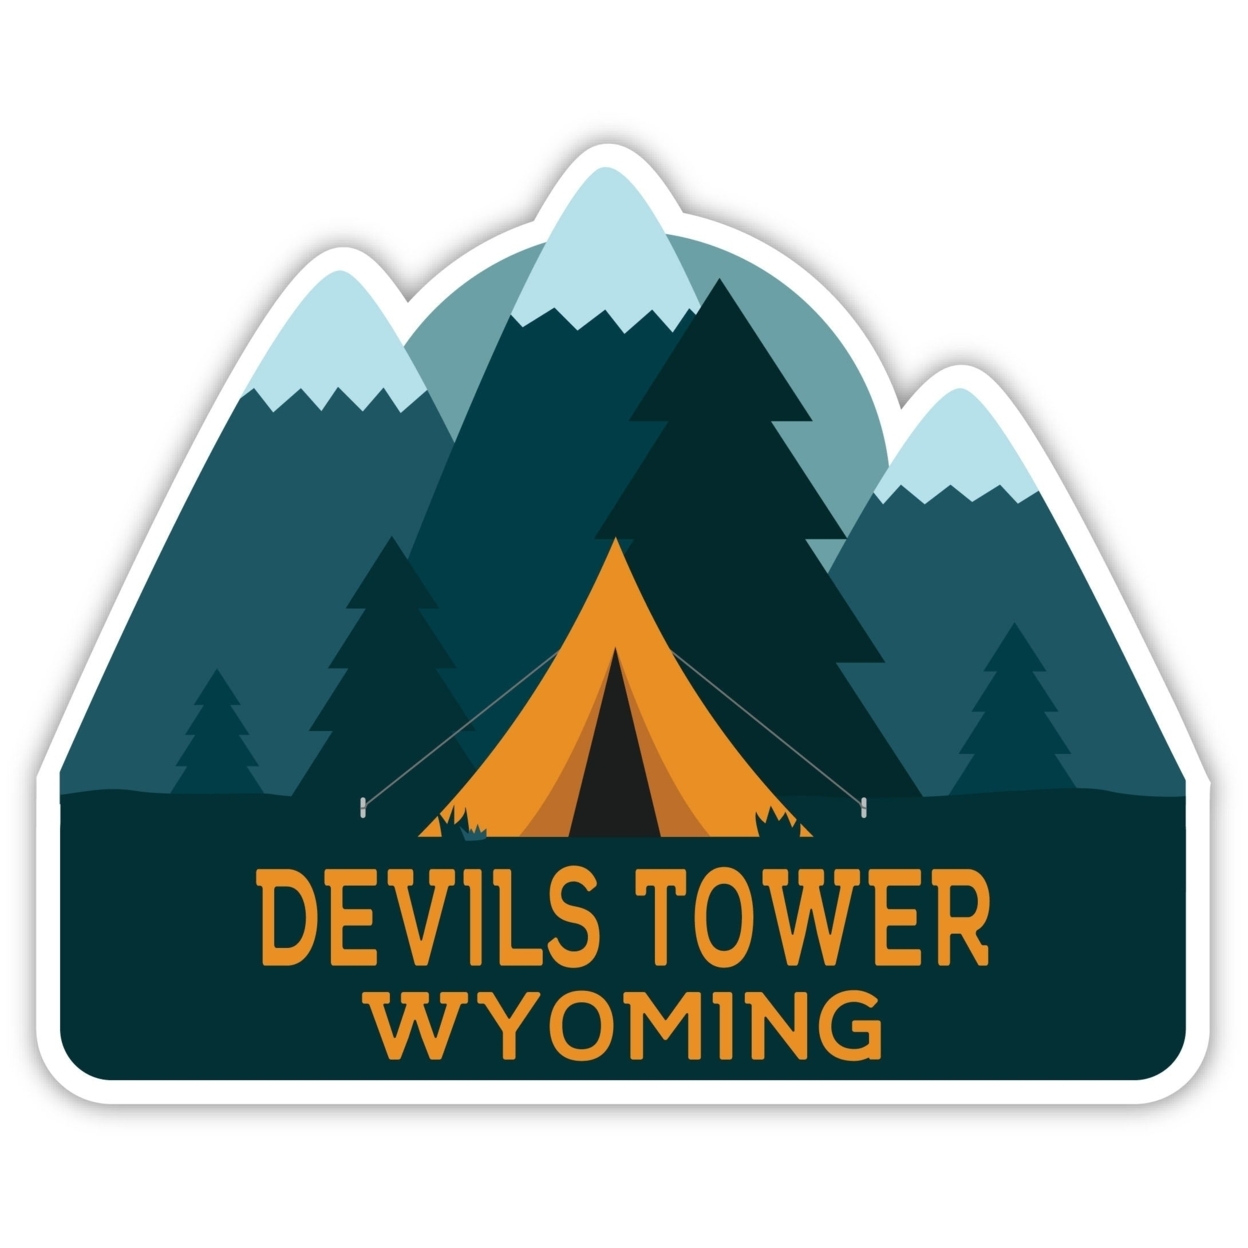 Devils Tower Wyoming Souvenir Decorative Stickers (Choose Theme And Size) - 4-Pack, 4-Inch, Bear